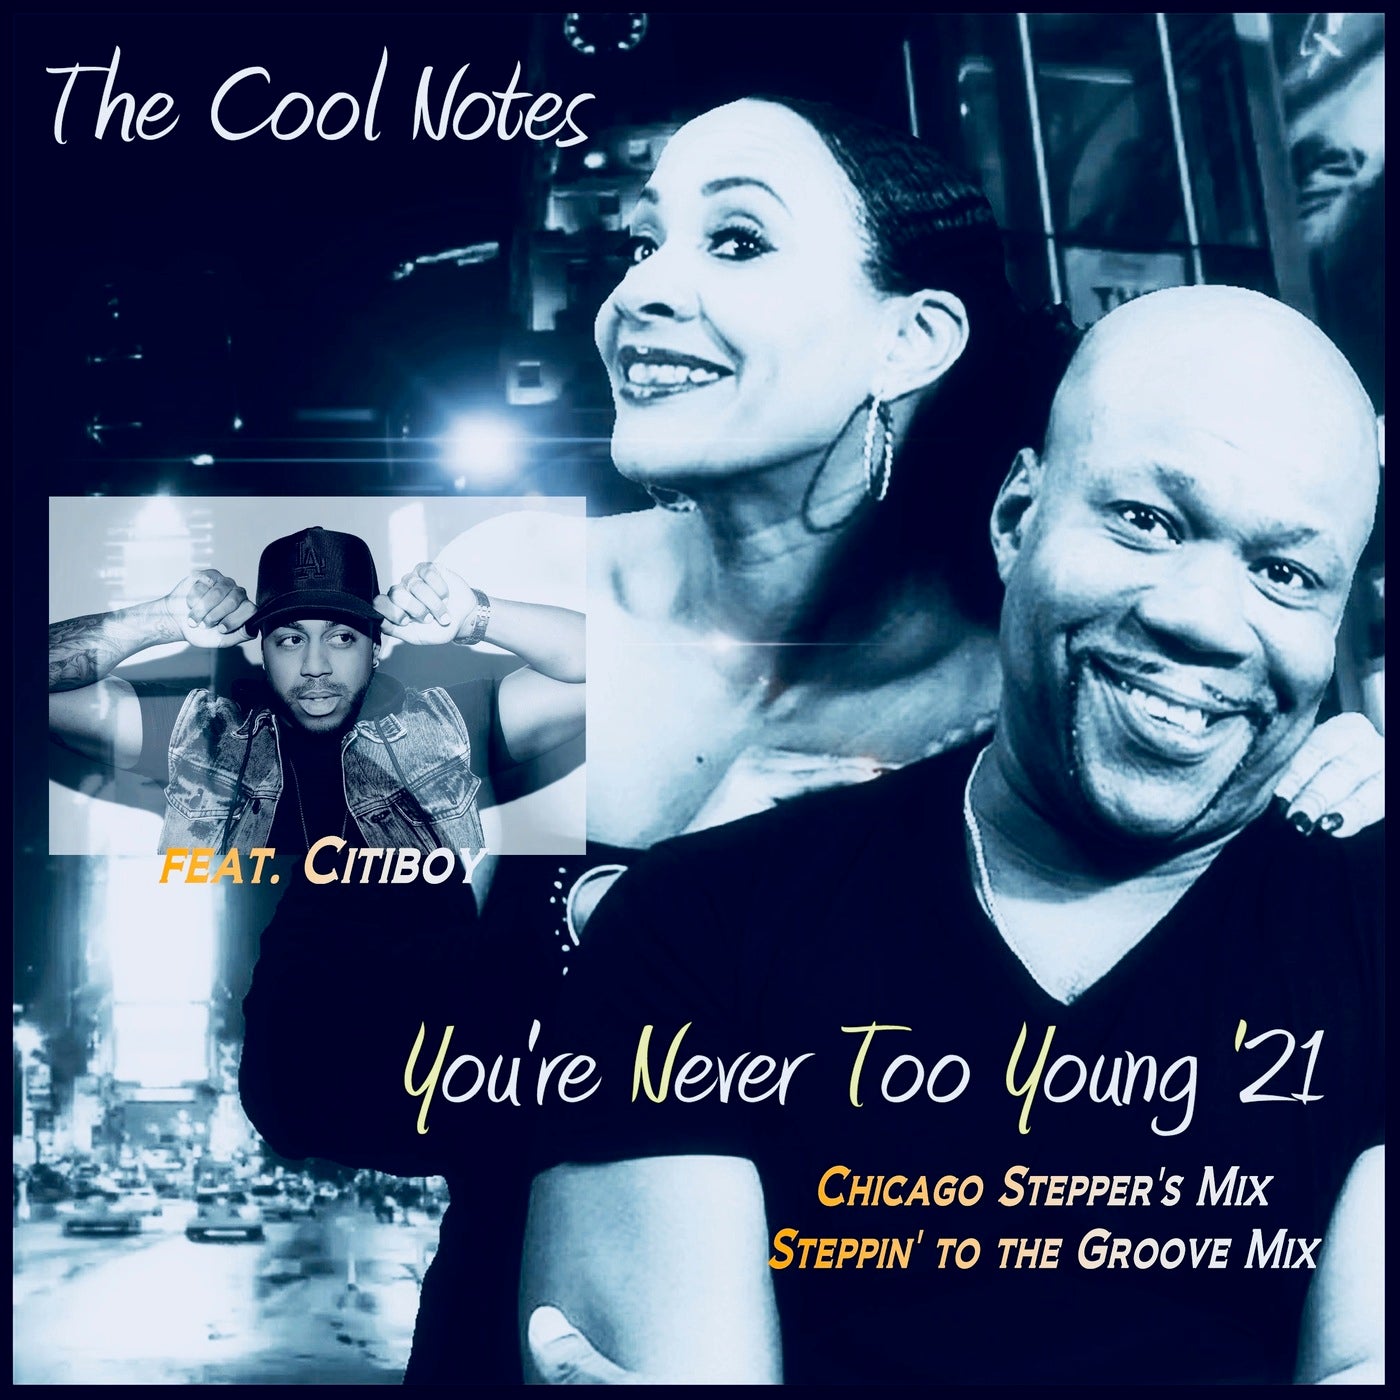 You're Never Too Young '21 (Chicago Stepper's Mix) feat. Citiboy